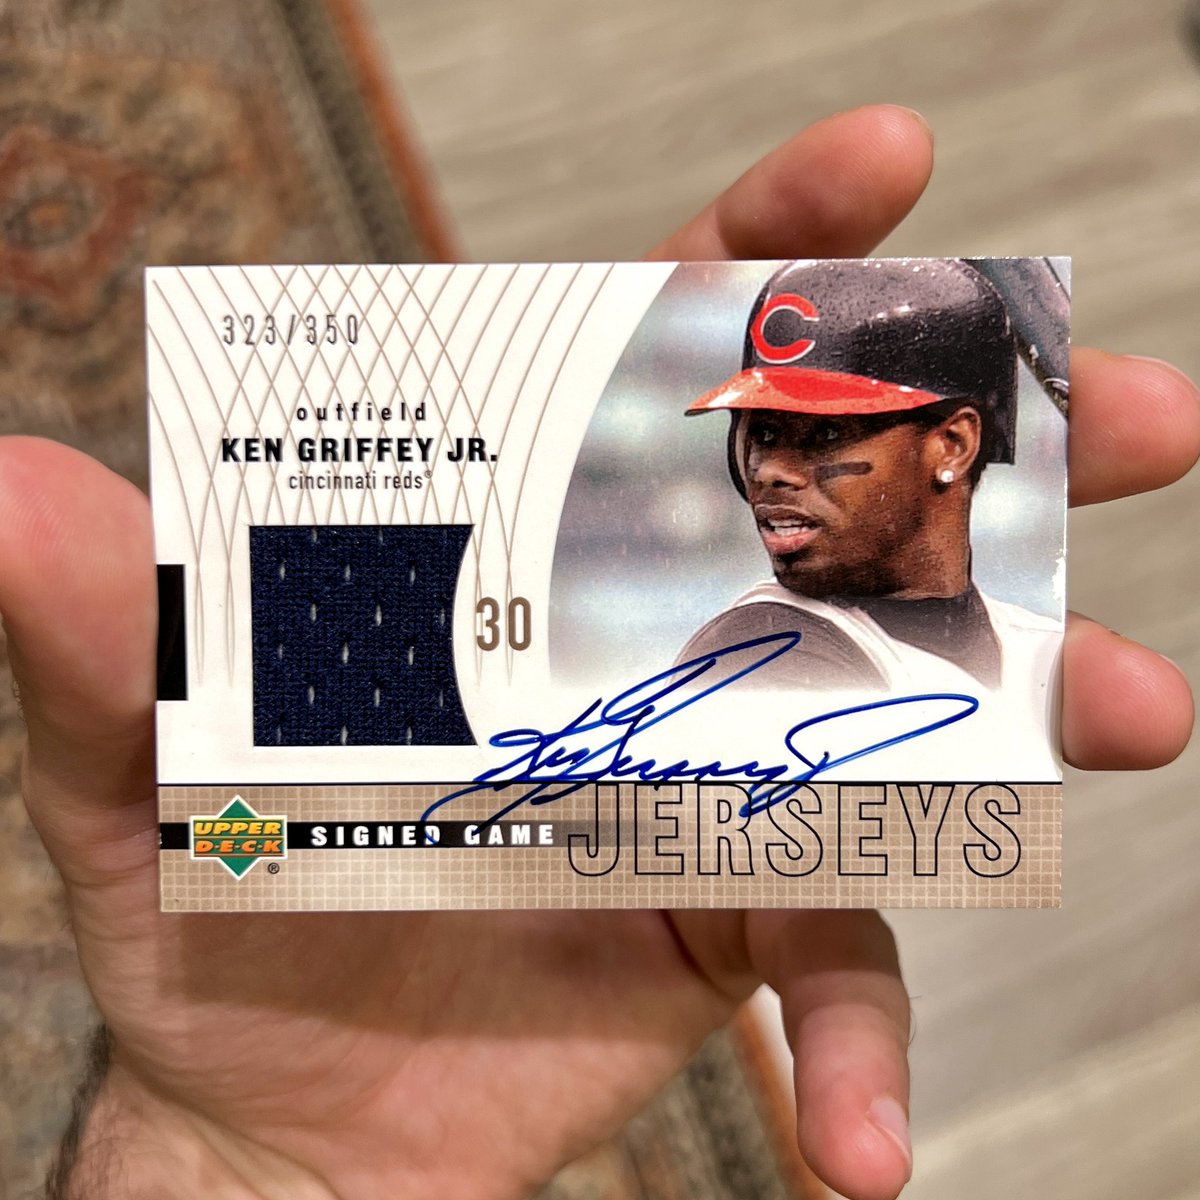 ⚾️ GRIFFEY AUTO GIVEAWAY ⚾️ To Enter: 1. Like this tweet 2. Join my discord! (See threaded tweet) That’s all…Good luck! 🍀